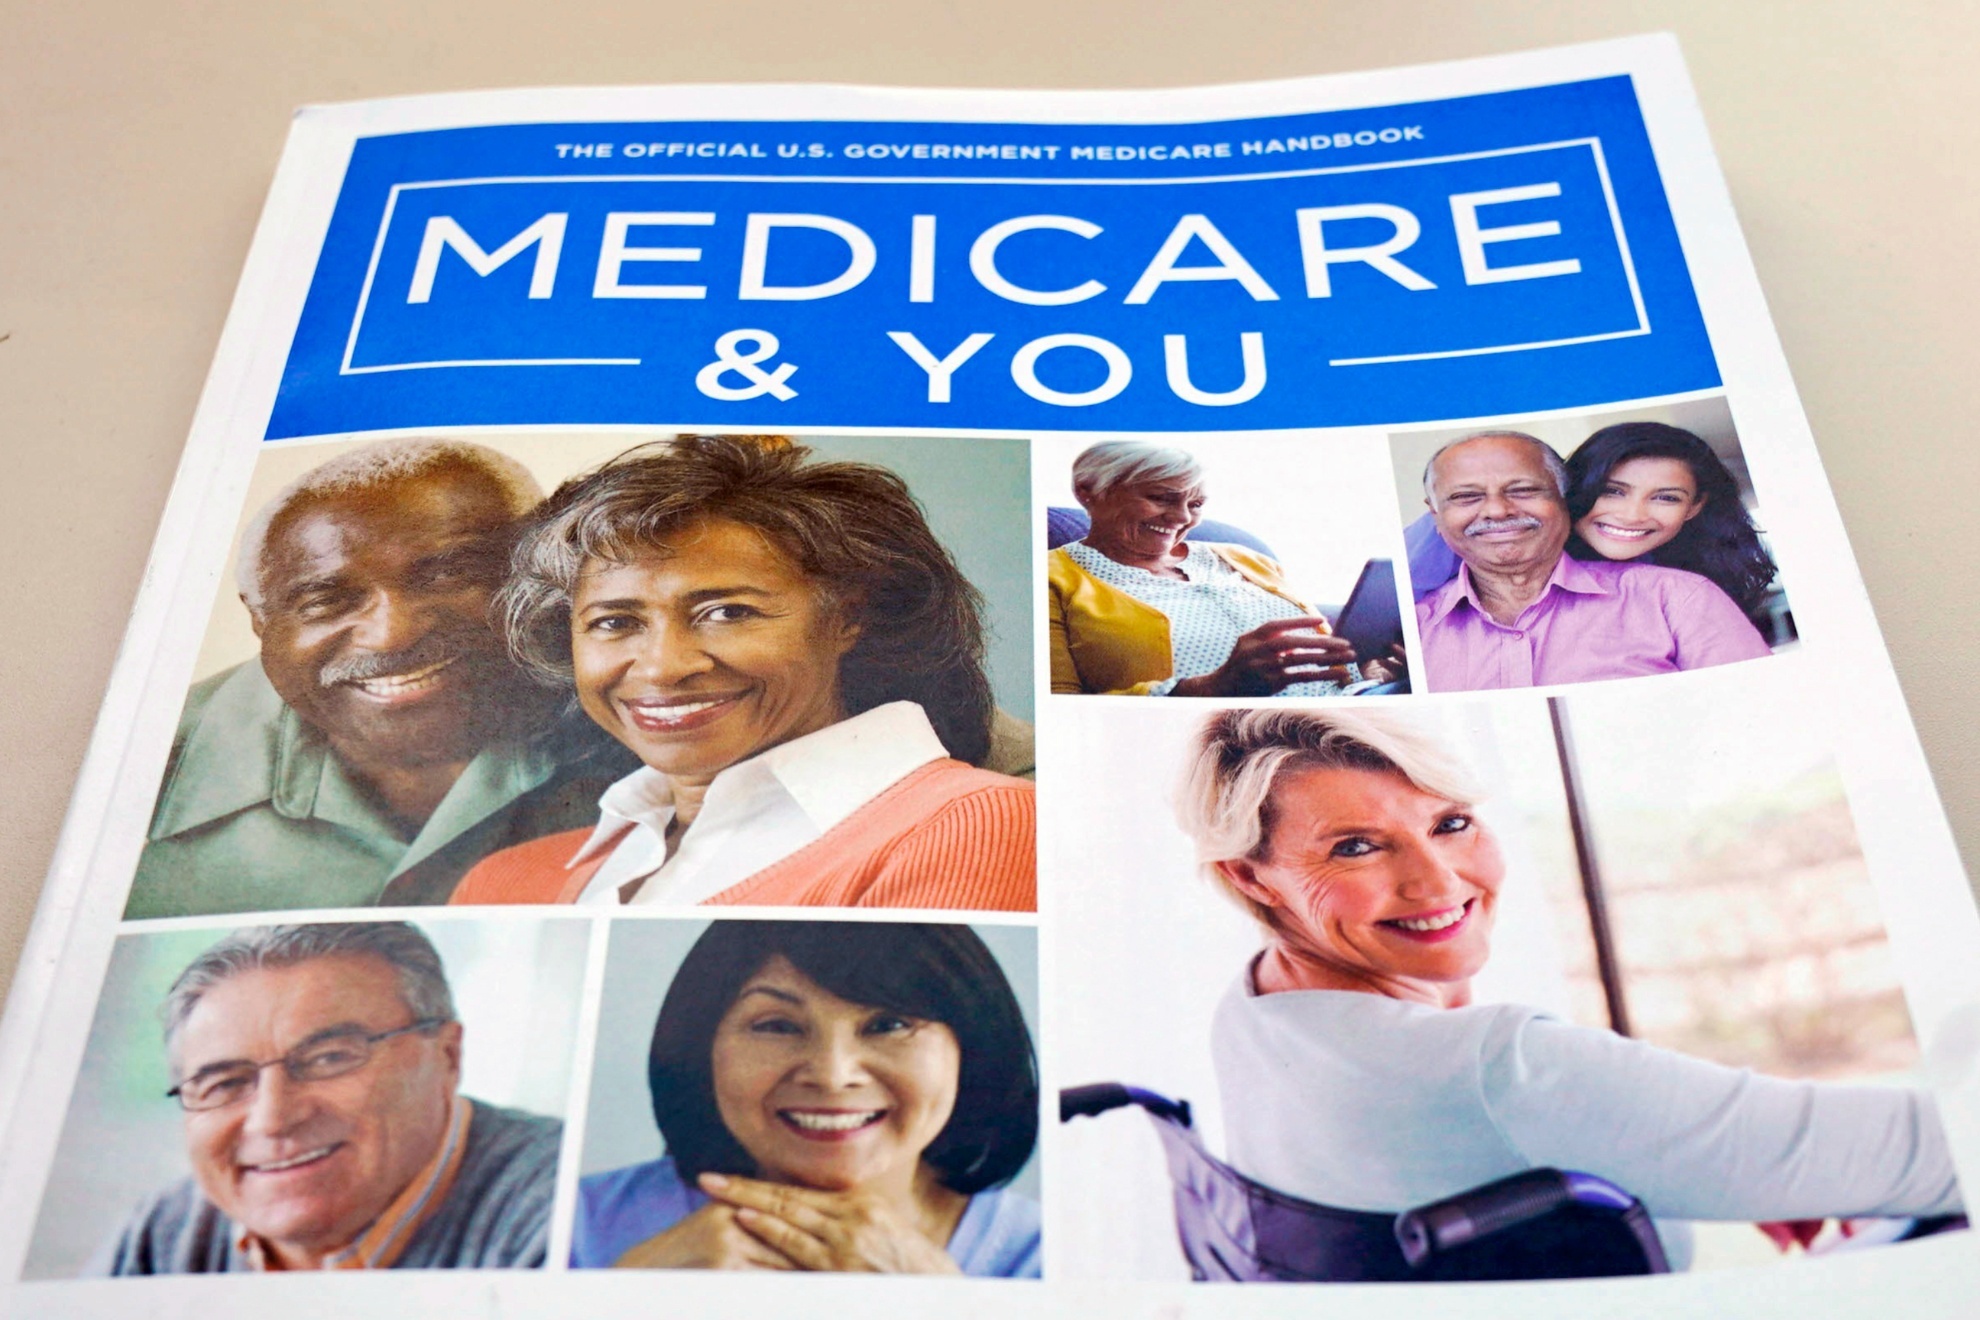 Medicare Savings Program: Eligibility, income limits and everything you need to qualify